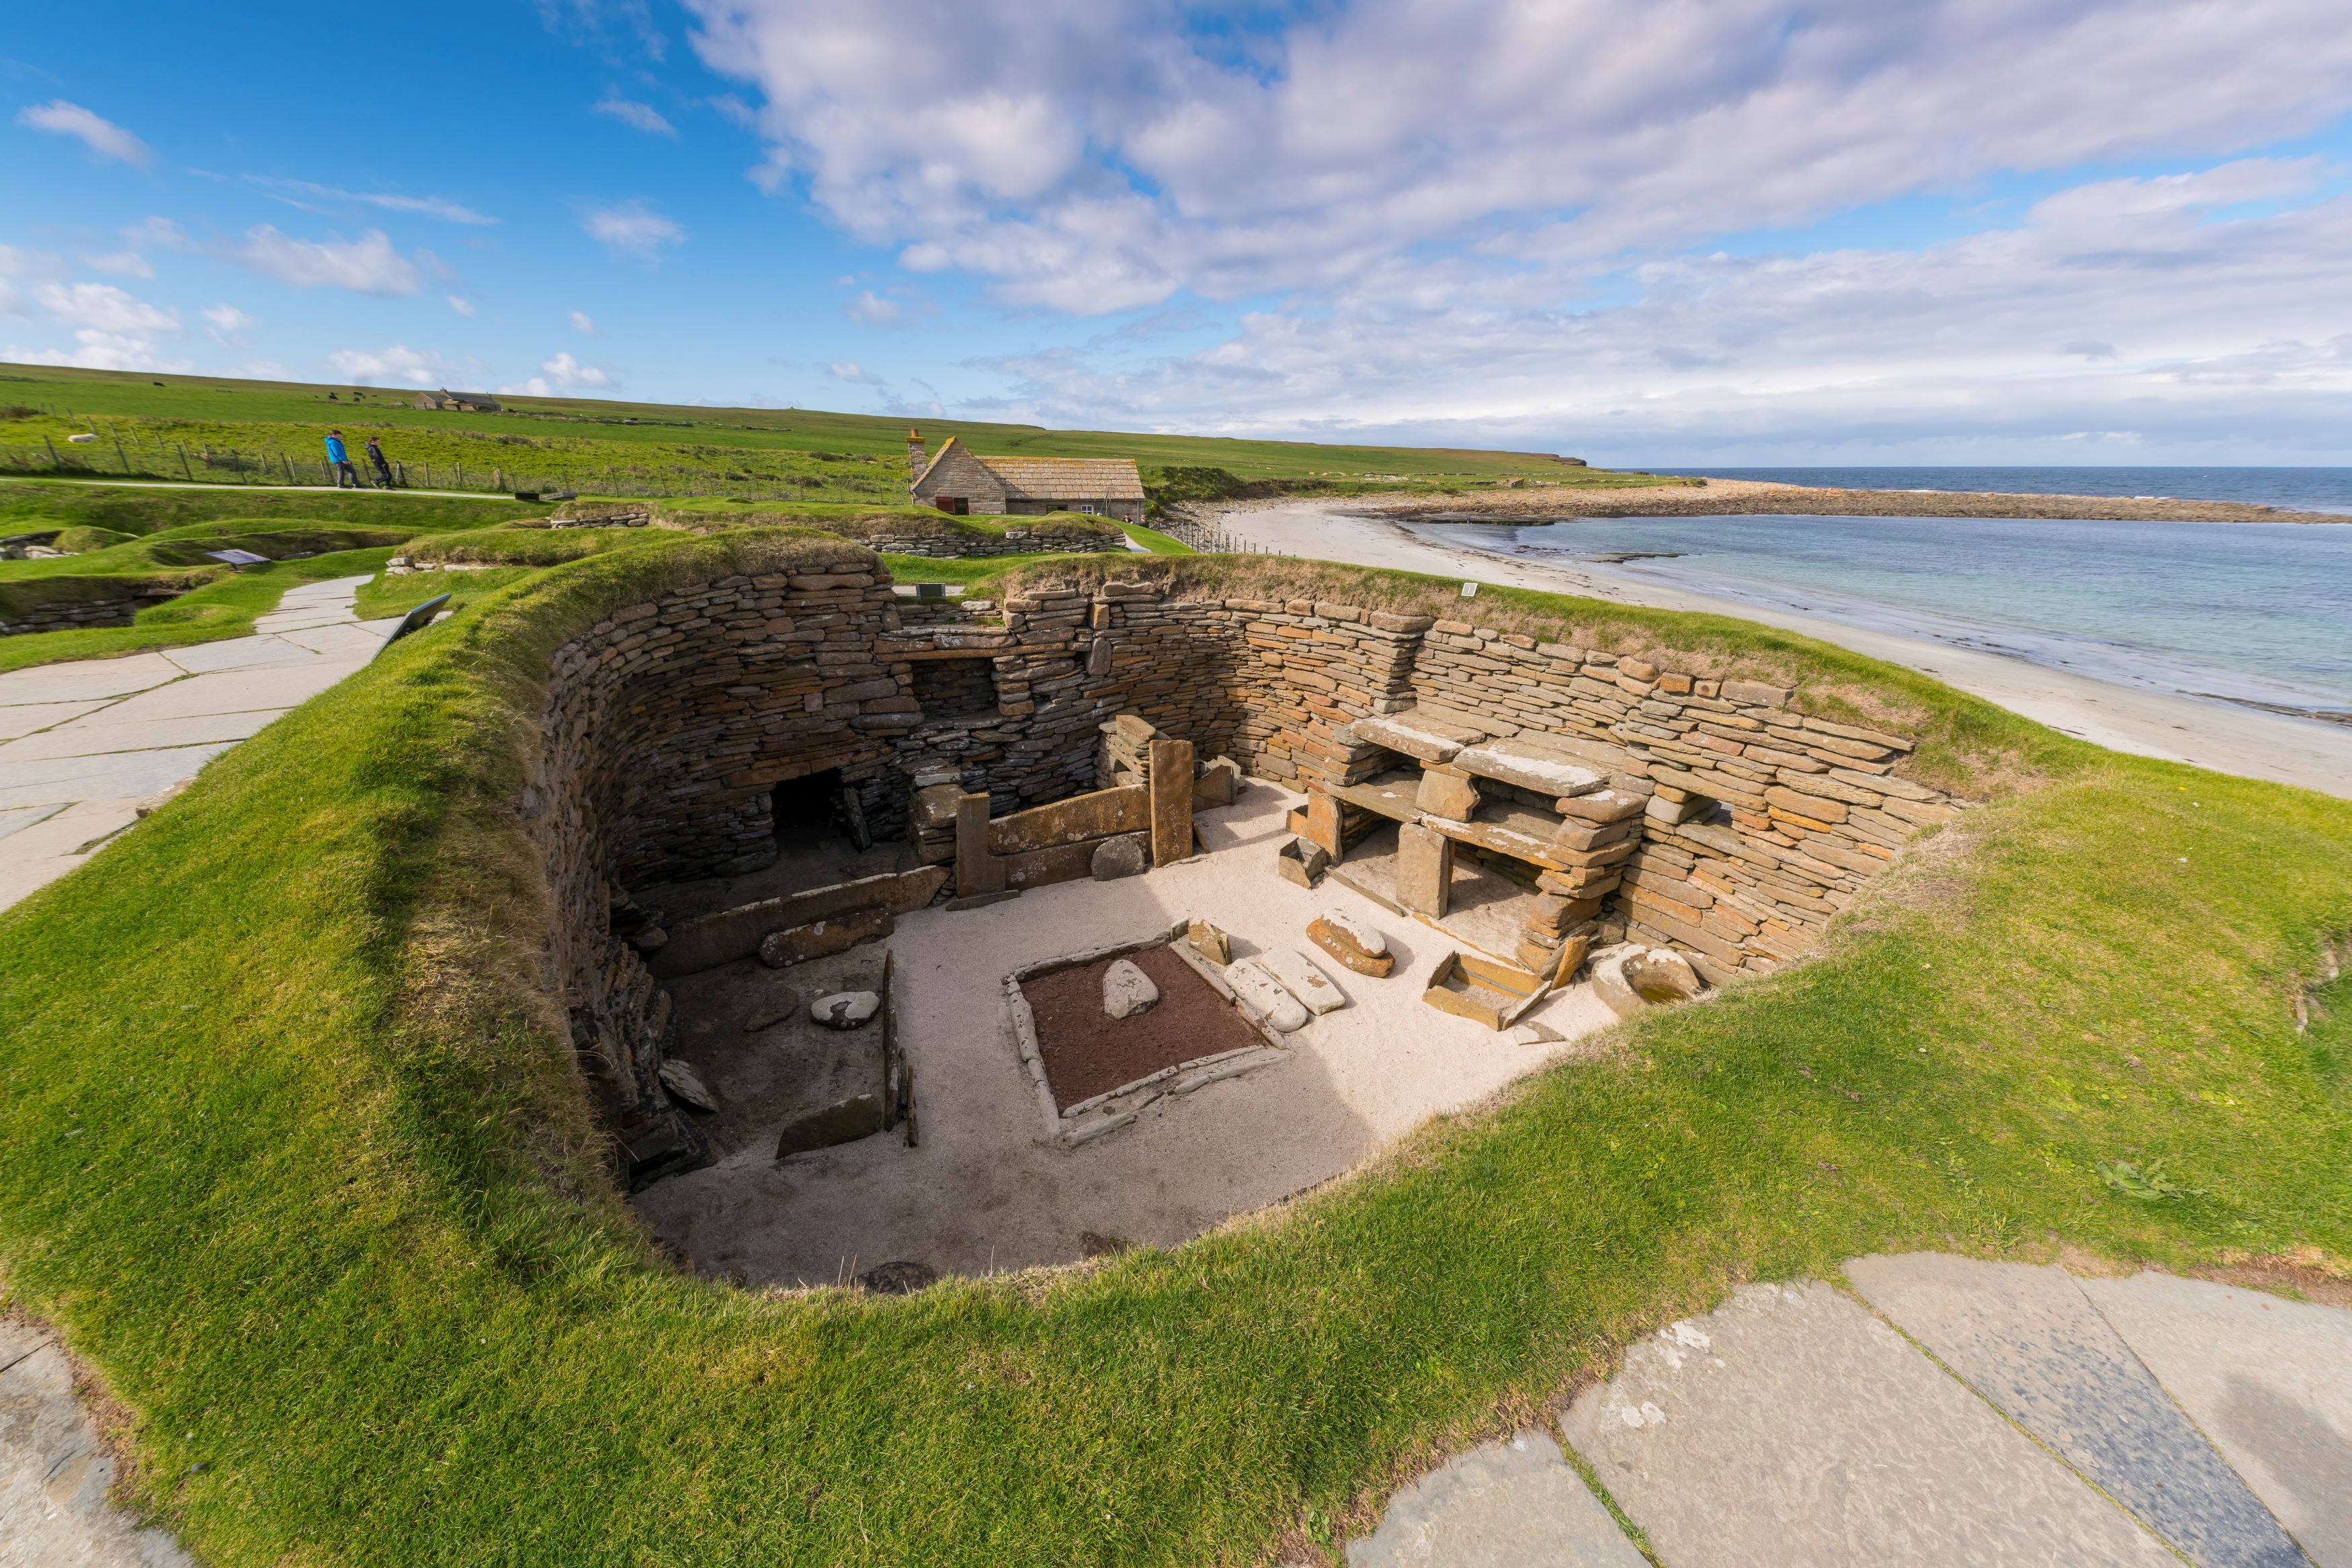 The stone-built Neolithic settlement and UNESCO World Heritage Site of Skara Brae on Mainland in Orkney, Scotland